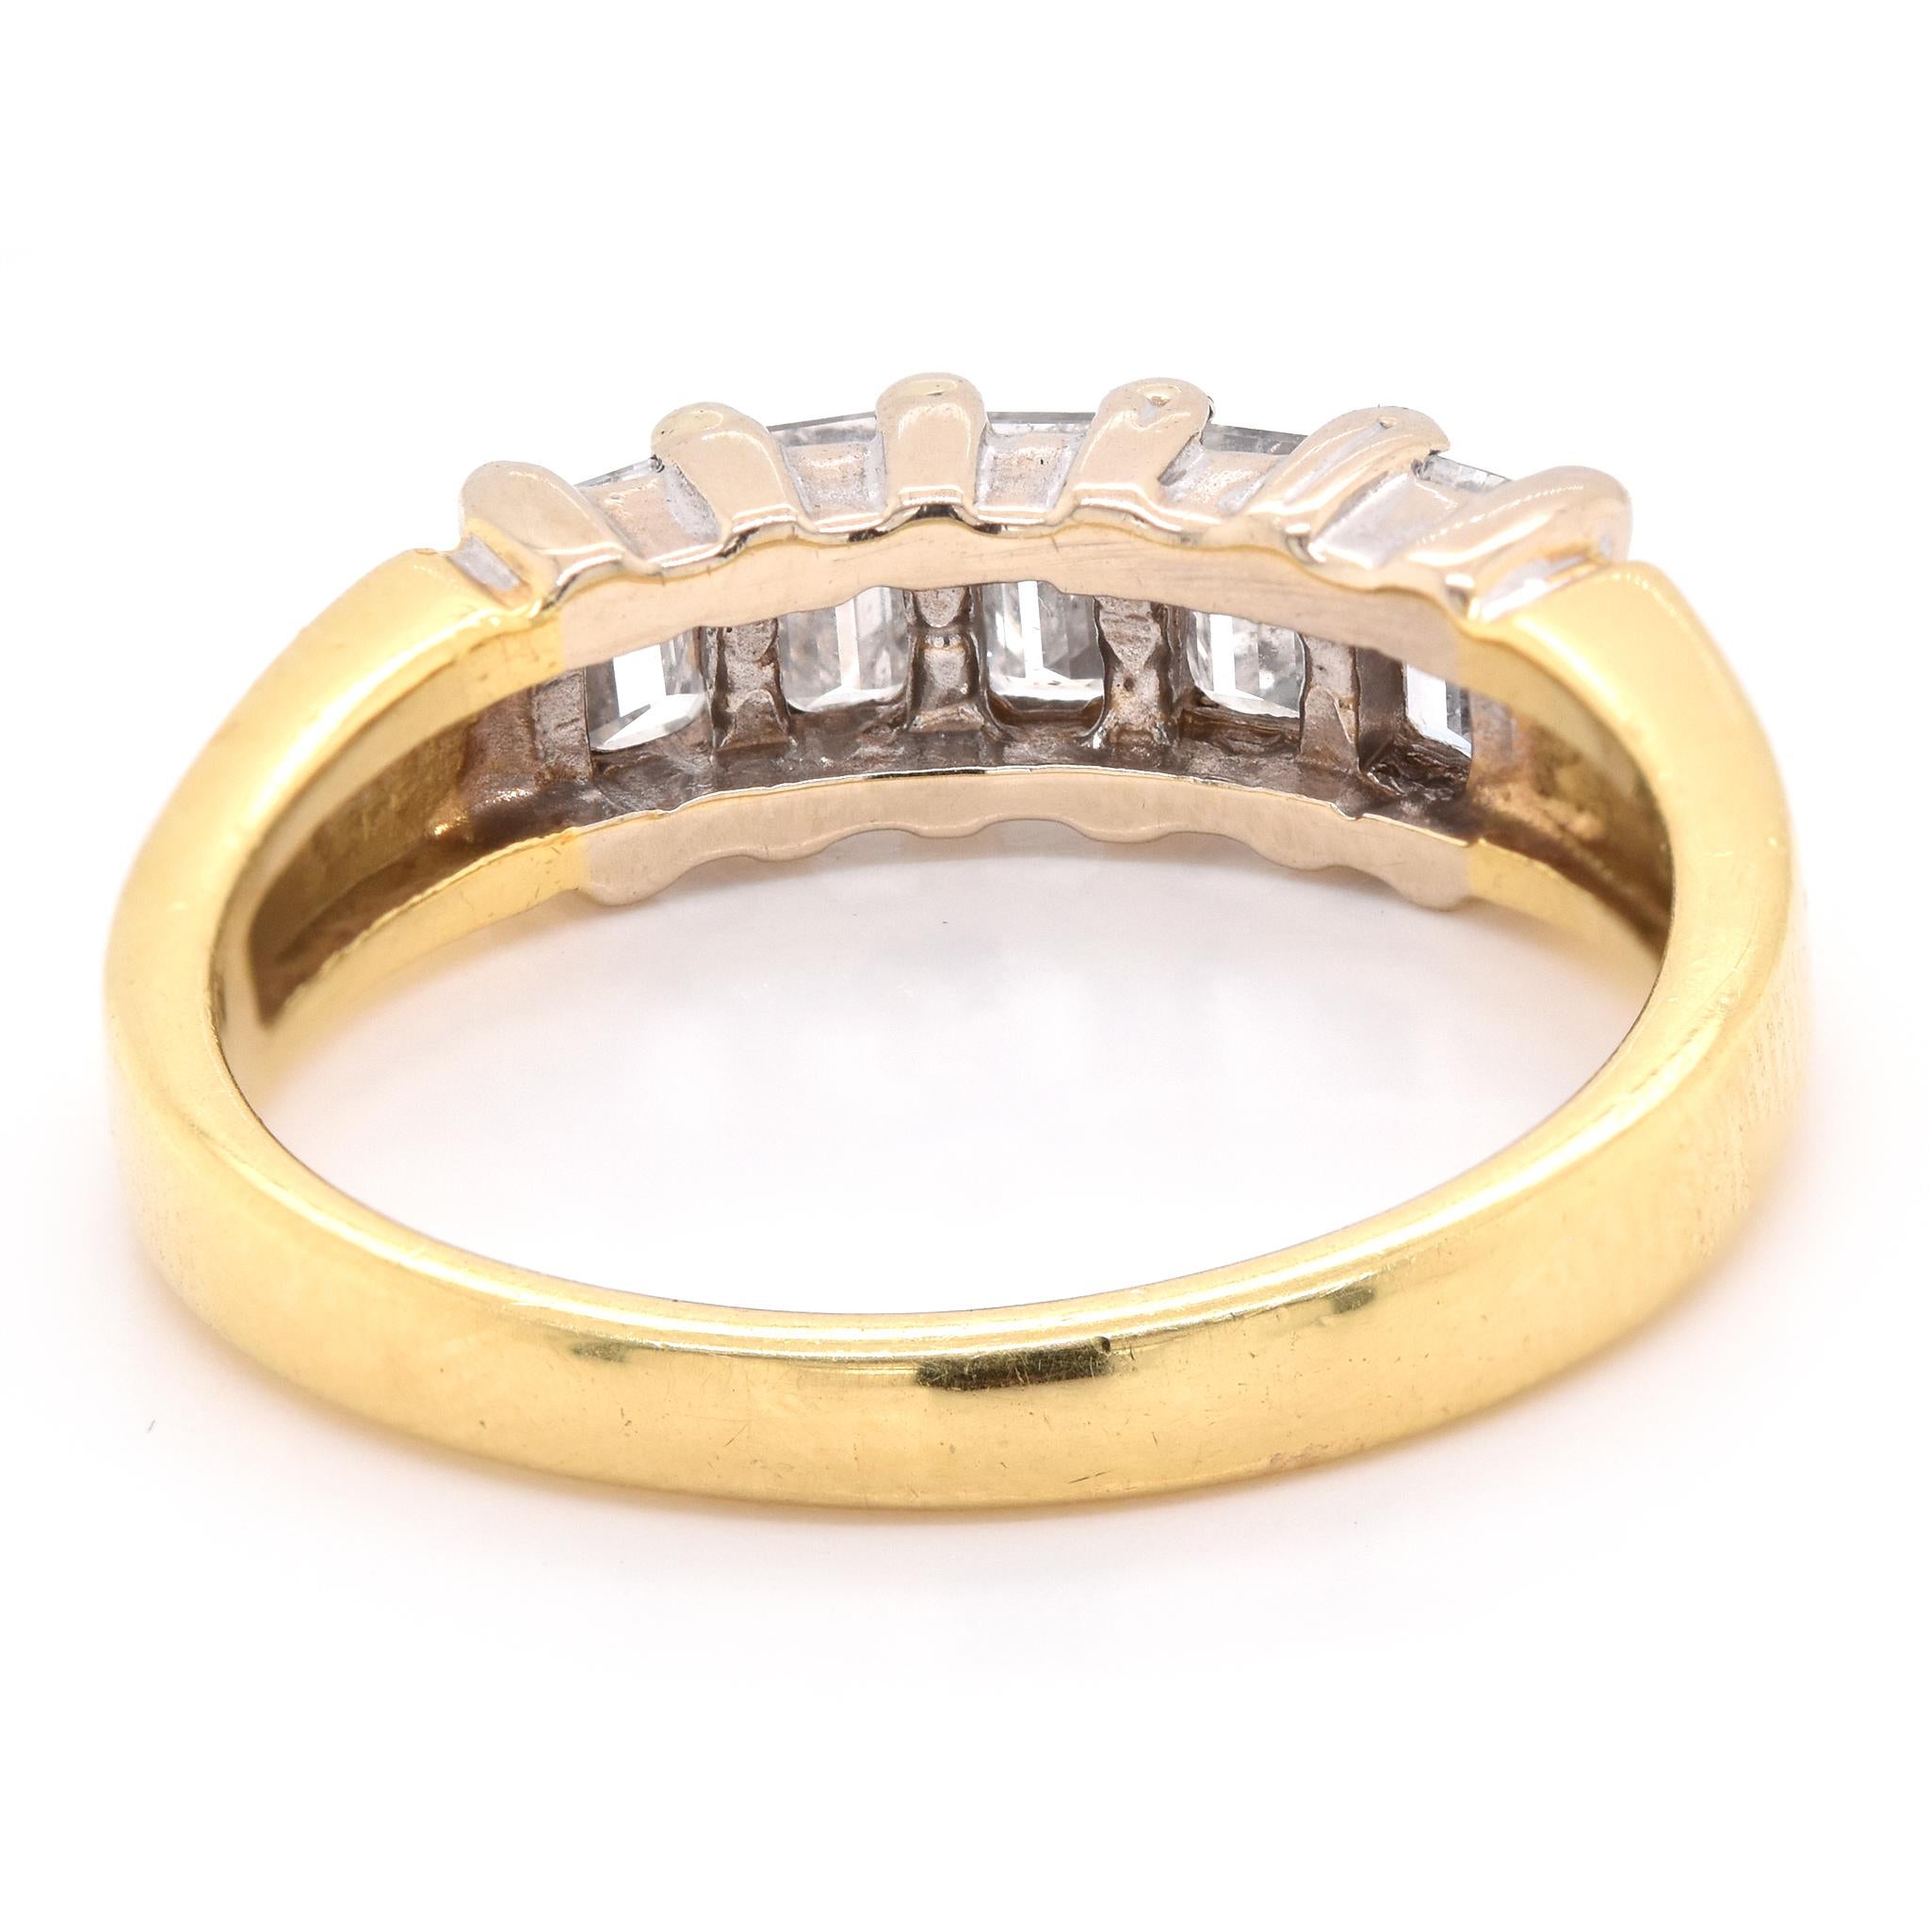 18 Karat Yellow Gold and 1.50 Carat Baguette Diamond Band Ring In Excellent Condition For Sale In Scottsdale, AZ